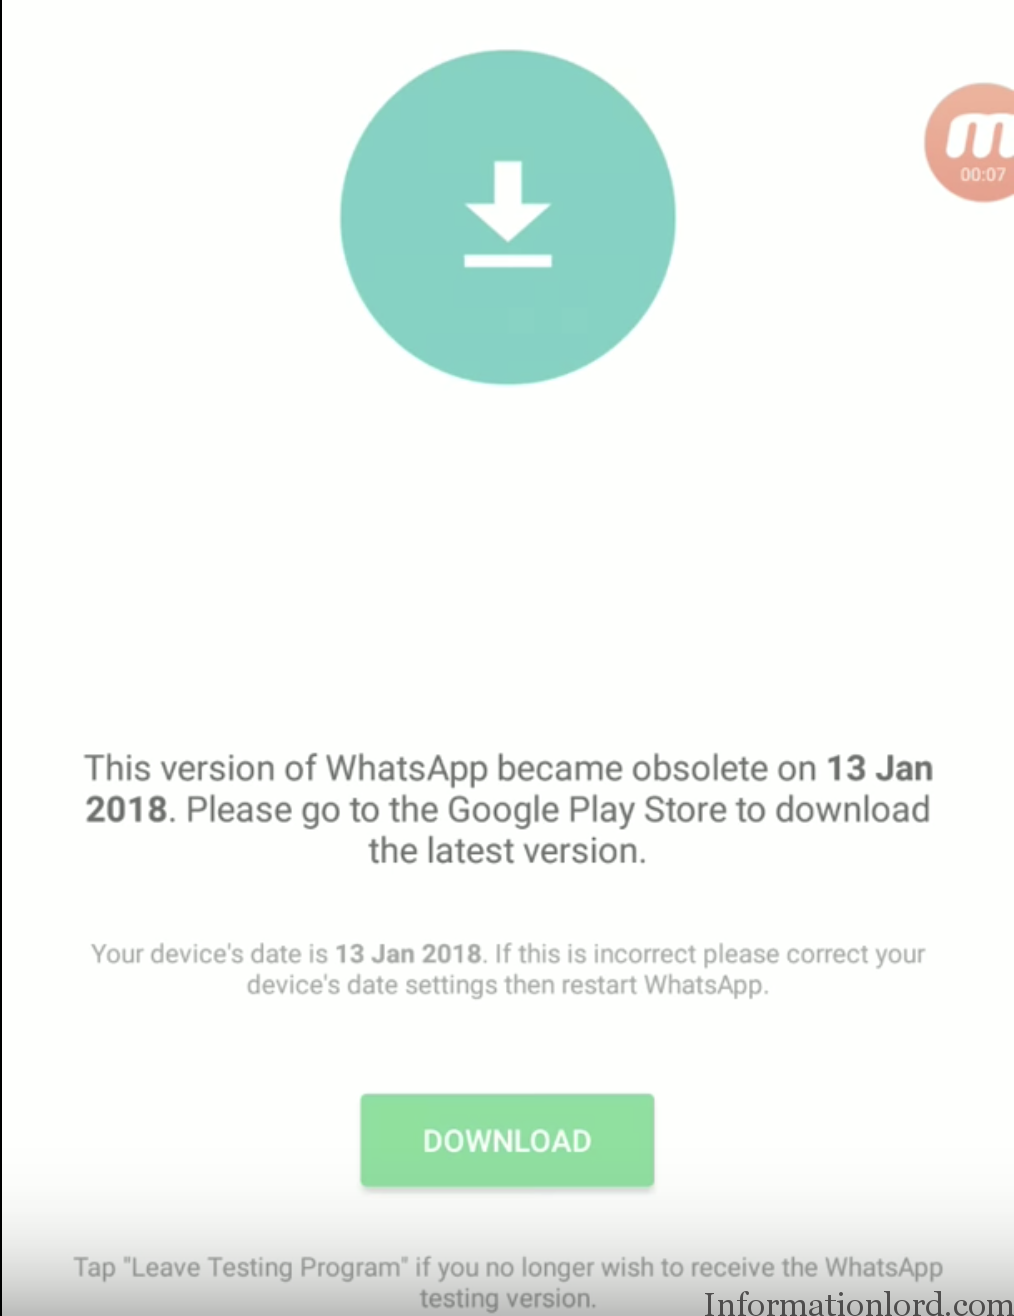 WhatsApp became Obsolete error fix for all devices 13Jan 2018